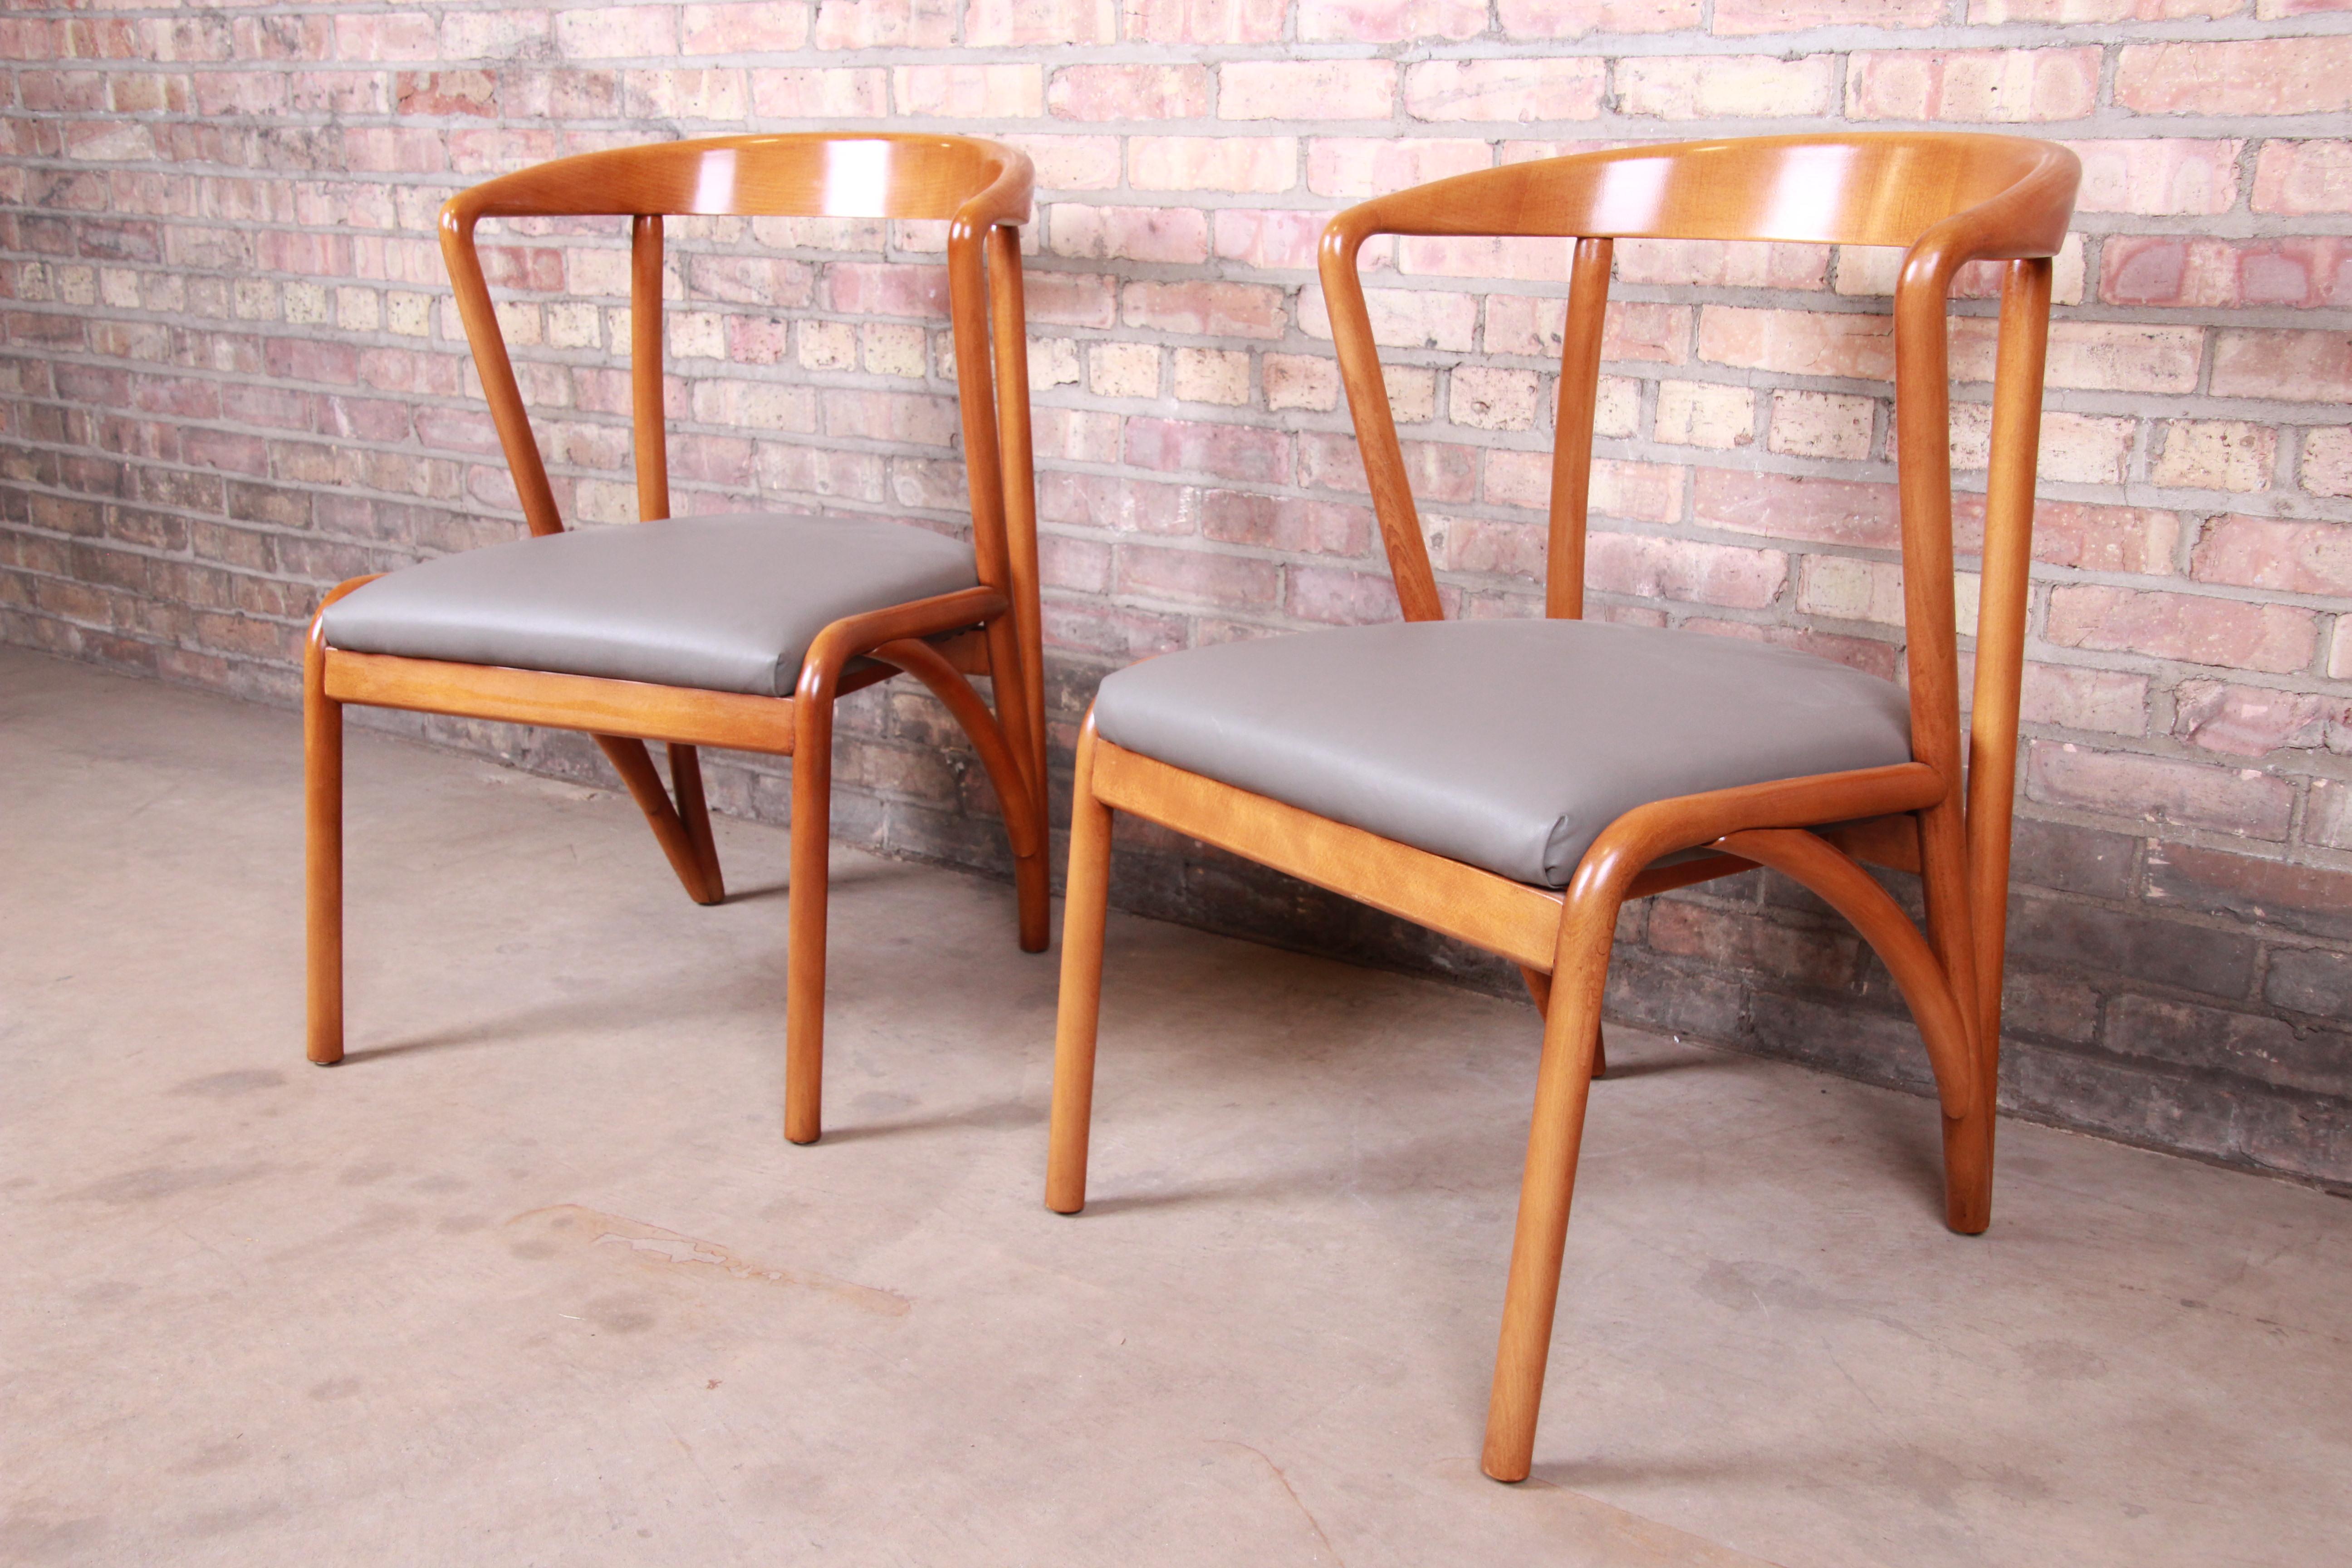 A gorgeous pair of Mid-Century Modern style armchairs

In the manner of Bertha Schaefer

By Baker Furniture

USA, early 21st century

Sculpted solid maple frames, with gray vinyl upholstery.

Measures: 22